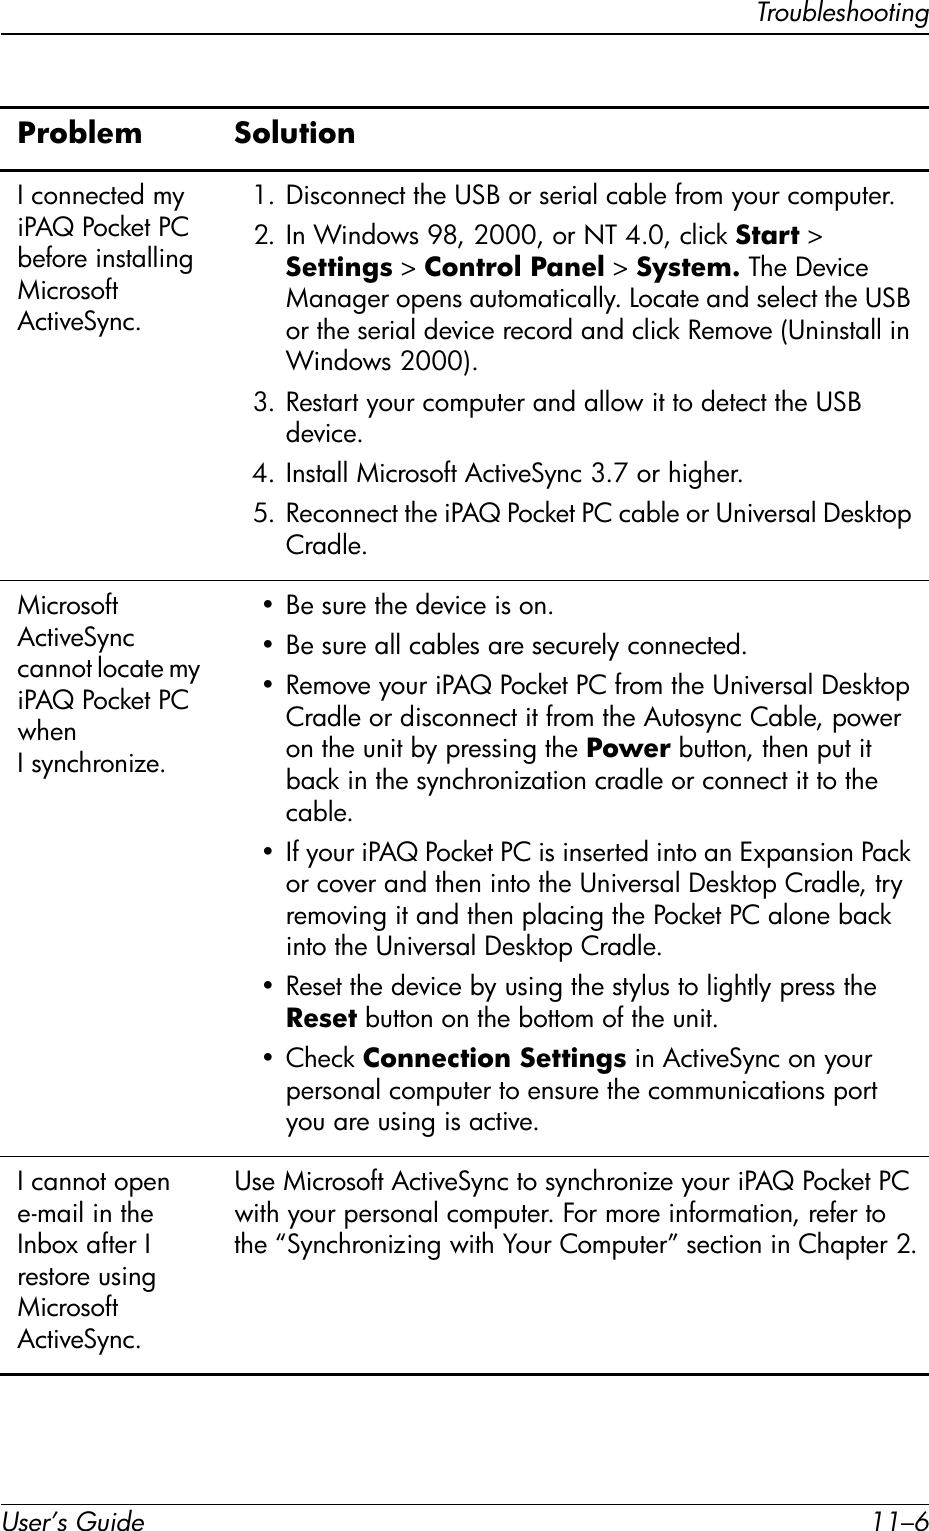 User’s Guide 11–6TroubleshootingI connected my iPAQ Pocket PC before installing Microsoft ActiveSync.1. Disconnect the USB or serial cable from your computer.2. In Windows 98, 2000, or NT 4.0, click Start &gt; Settings &gt; Control Panel &gt; System. The Device Manager opens automatically. Locate and select the USB or the serial device record and click Remove (Uninstall in Windows 2000).3. Restart your computer and allow it to detect the USB device.4. Install Microsoft ActiveSync 3.7 or higher.5. Reconnect the iPAQ Pocket PC cable or Universal Desktop Cradle.Microsoft ActiveSync cannot locate my iPAQ Pocket PC when Isynchronize.• Be sure the device is on.• Be sure all cables are securely connected.• Remove your iPAQ Pocket PC from the Universal Desktop Cradle or disconnect it from the Autosync Cable, power on the unit by pressing the Power button, then put it back in the synchronization cradle or connect it to the cable.• If your iPAQ Pocket PC is inserted into an Expansion Pack or cover and then into the Universal Desktop Cradle, try removing it and then placing the Pocket PC alone back into the Universal Desktop Cradle.• Reset the device by using the stylus to lightly press the Reset button on the bottom of the unit.•Check Connection Settings in ActiveSync on your personal computer to ensure the communications port you are using is active.I cannot open e-mail in the Inbox after I restore using Microsoft ActiveSync.Use Microsoft ActiveSync to synchronize your iPAQ Pocket PC with your personal computer. For more information, refer to the “Synchronizing with Your Computer” section in Chapter 2.Problem Solution